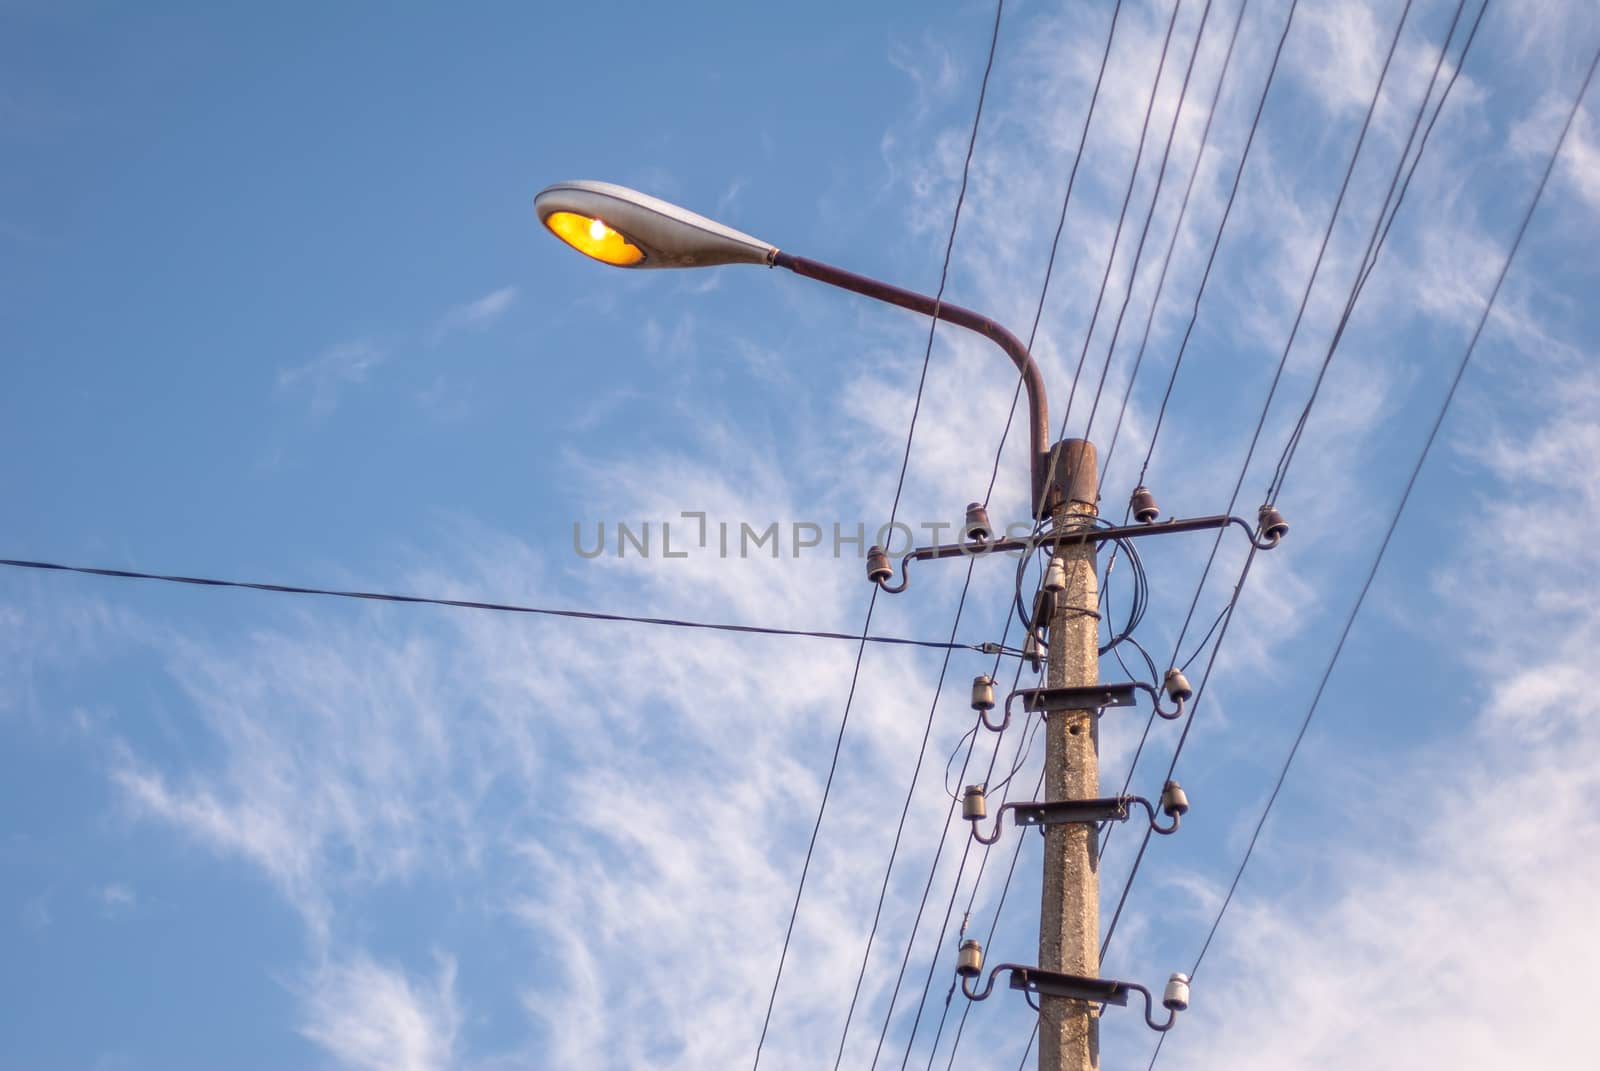 vintage electric pole in a sunny day against the blue sky